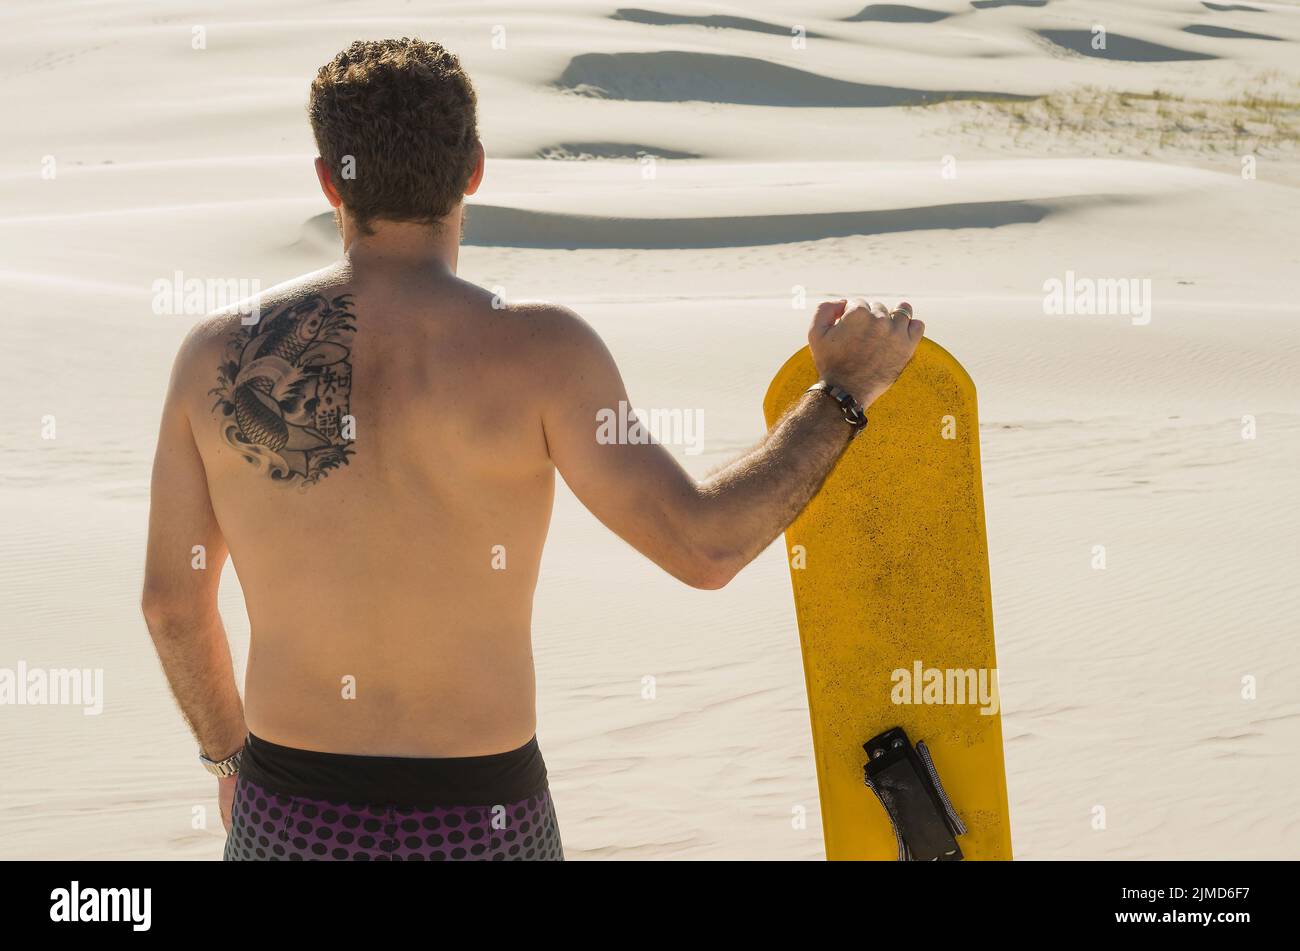 Young man on his back looking at the sand dunes, preparing to practice sandboarding. Stock Photo